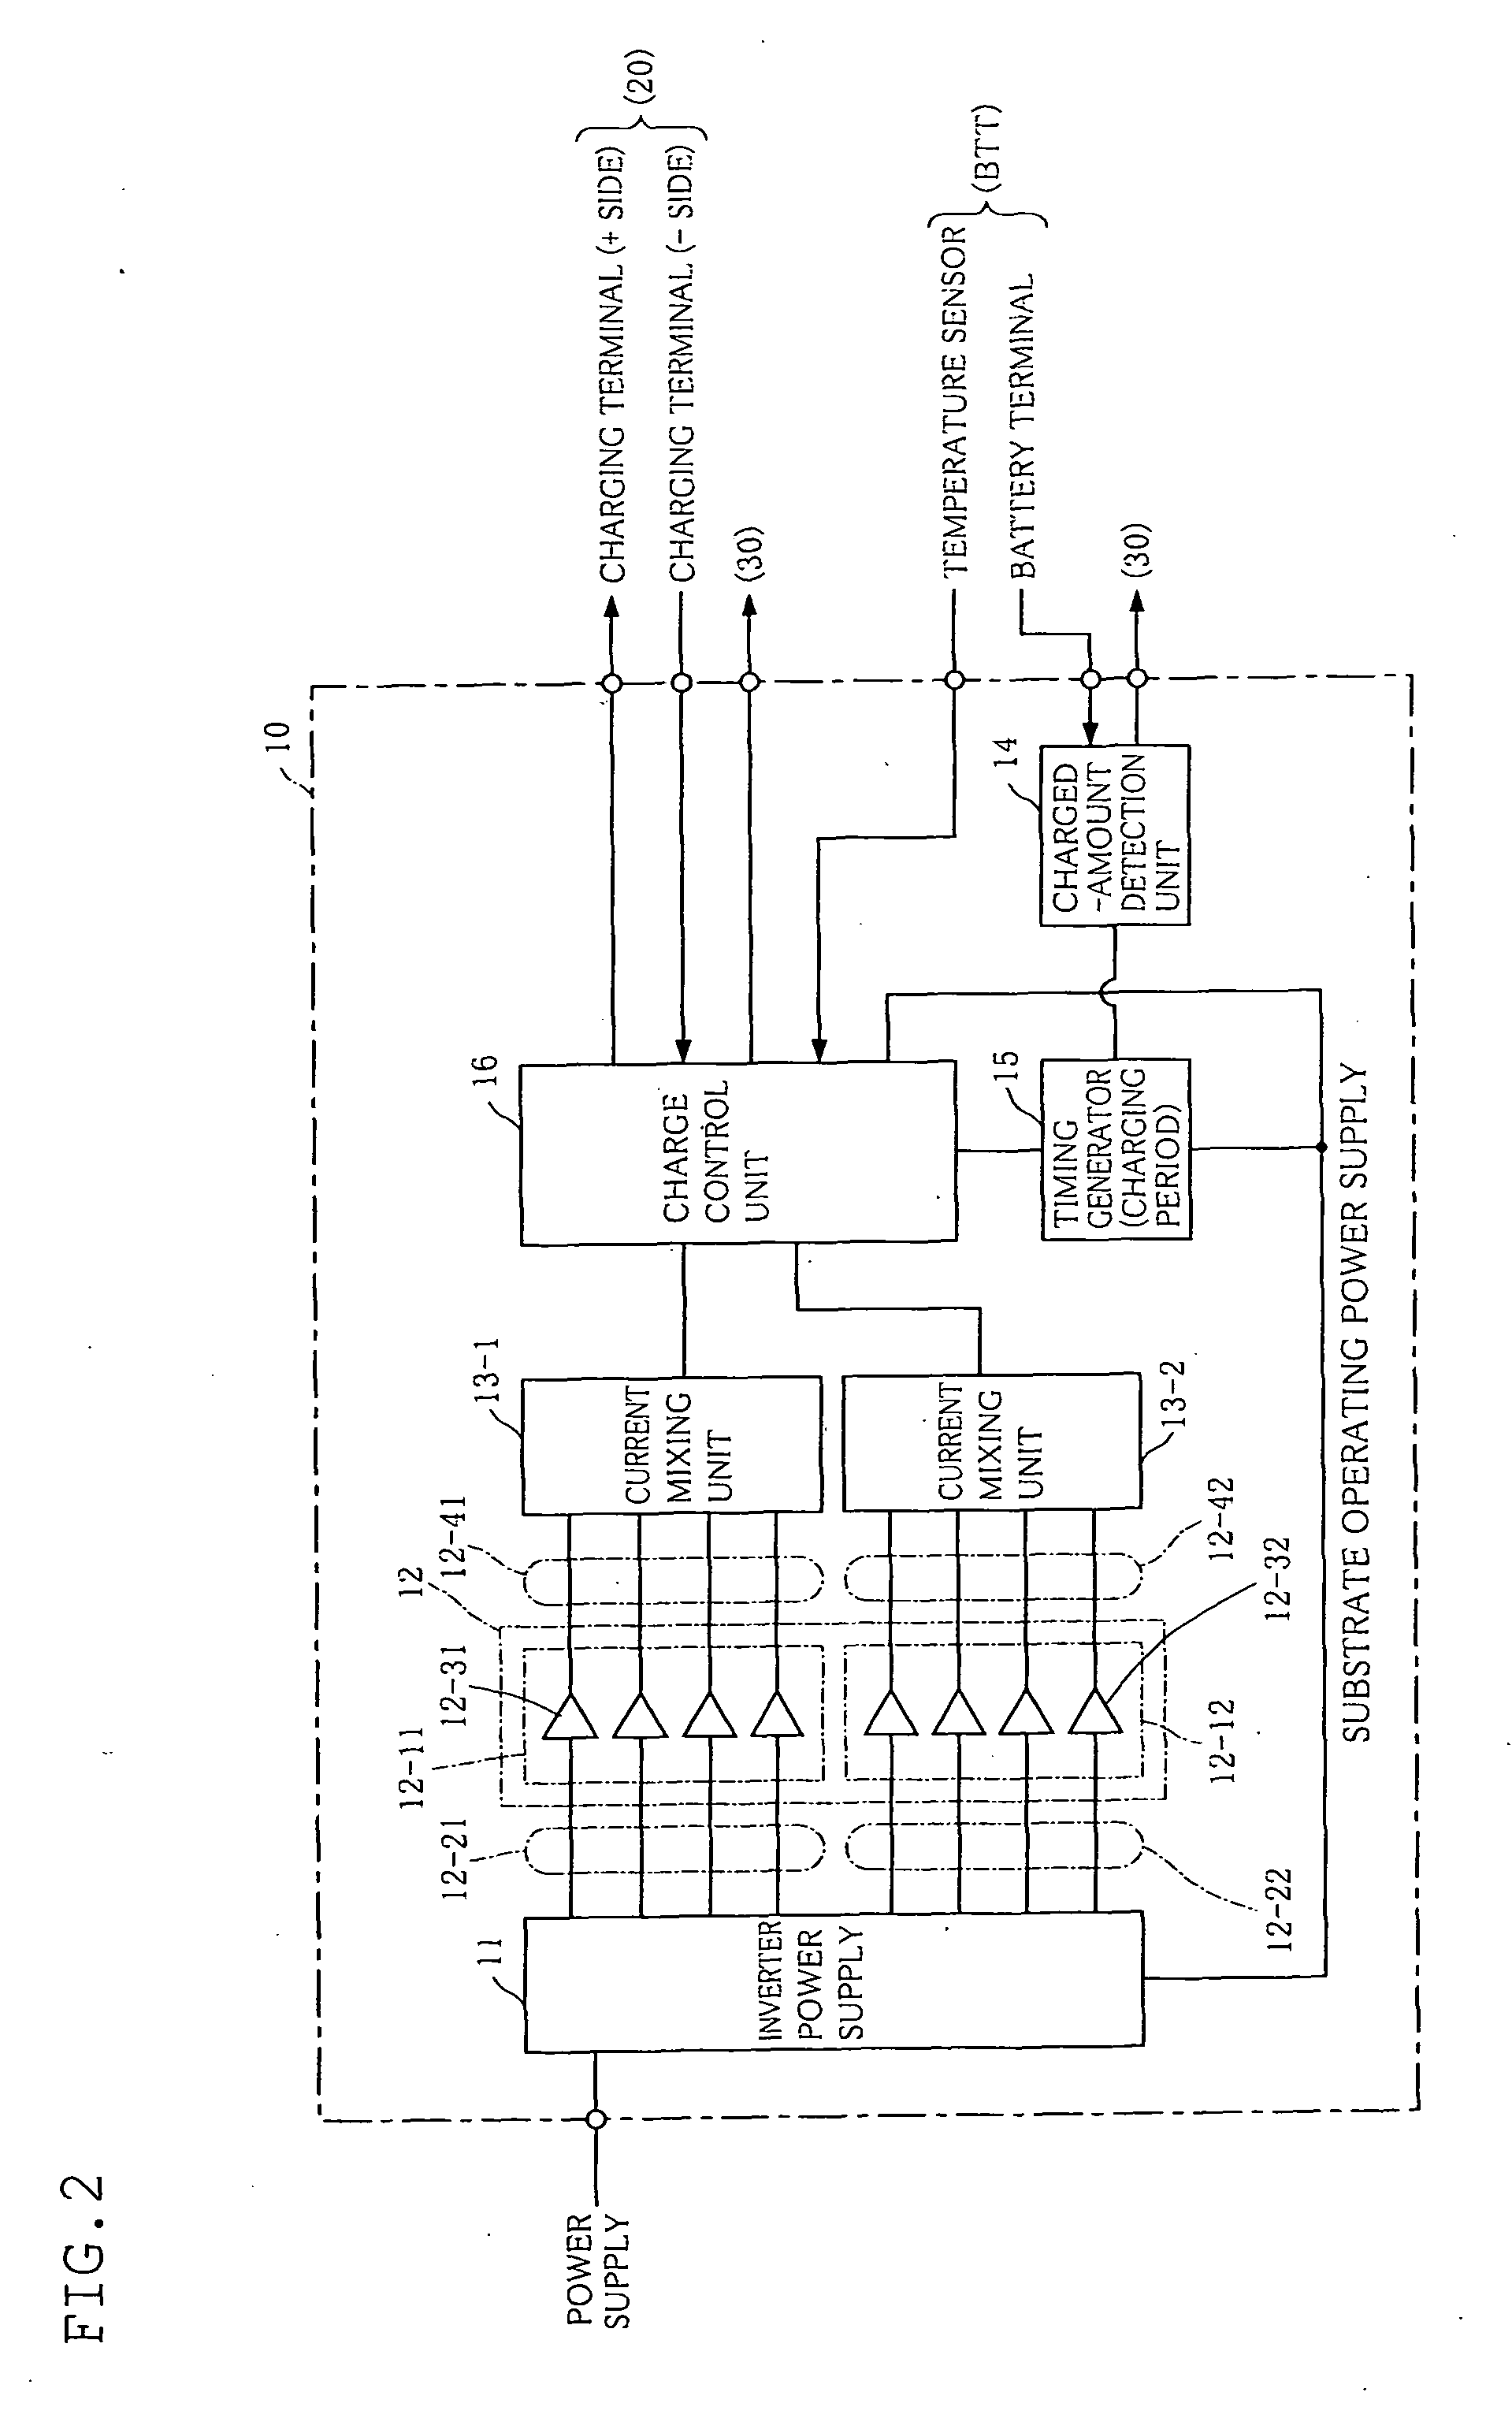 Charger and charging apparatus